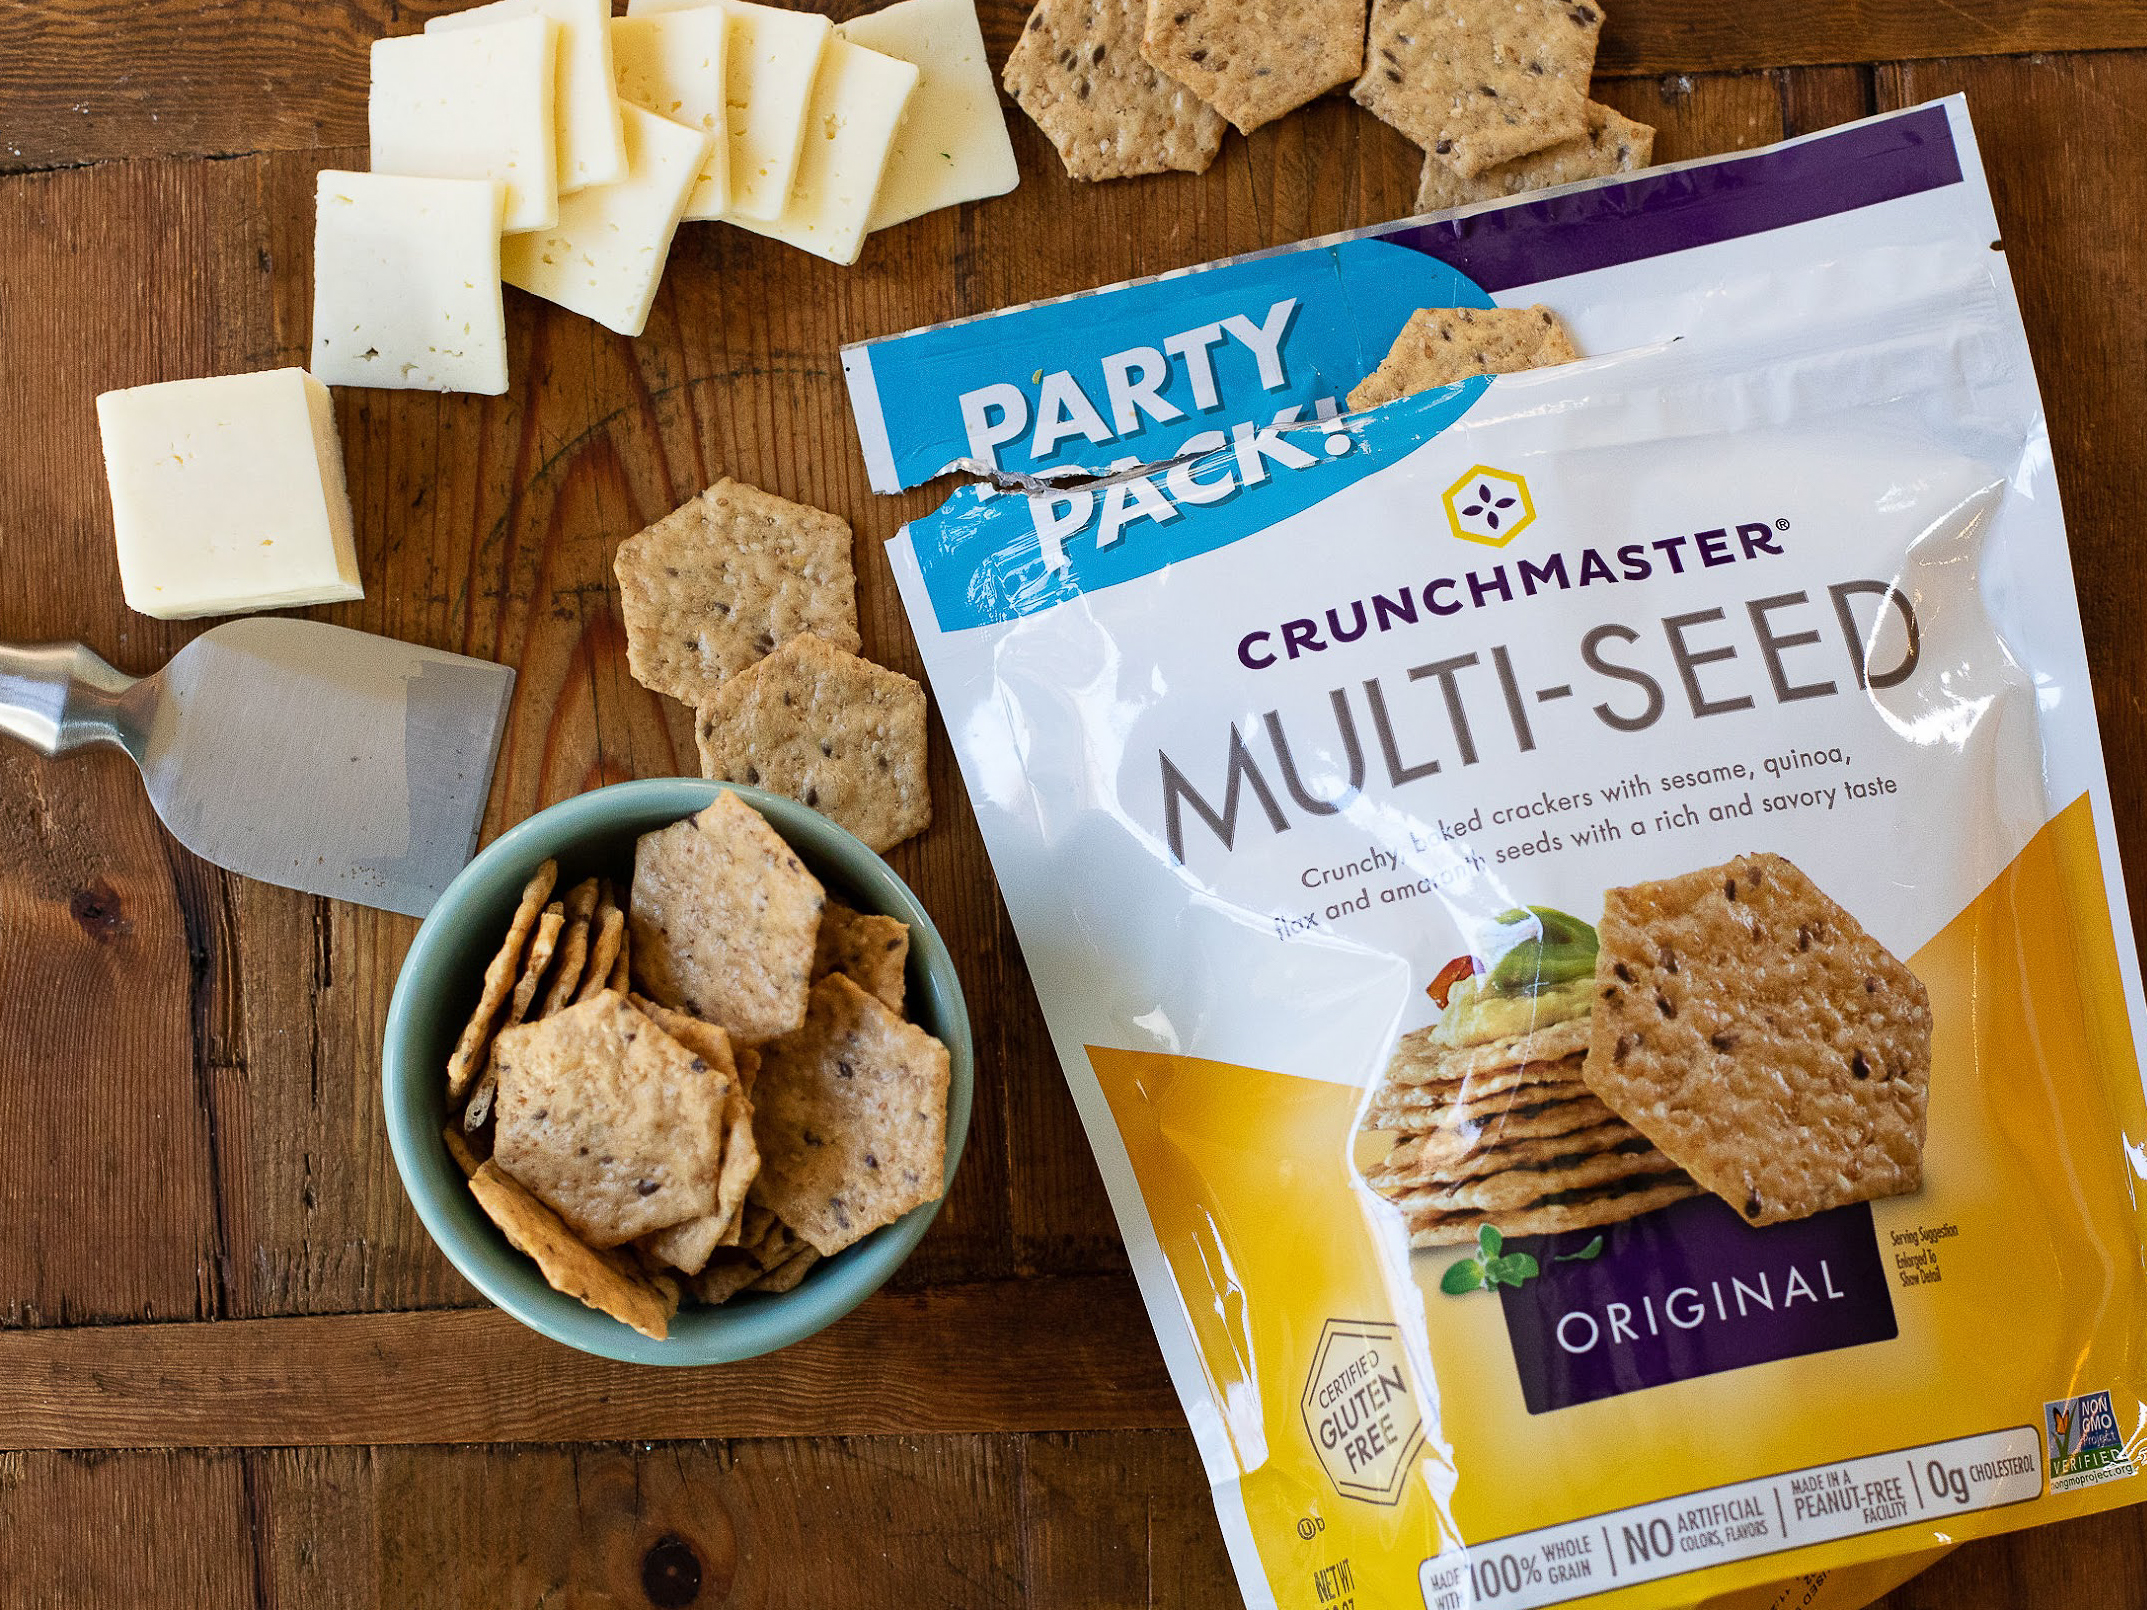 Crunchmaster Party Pack Just $5.24 At Publix (Regular Price $8.49)